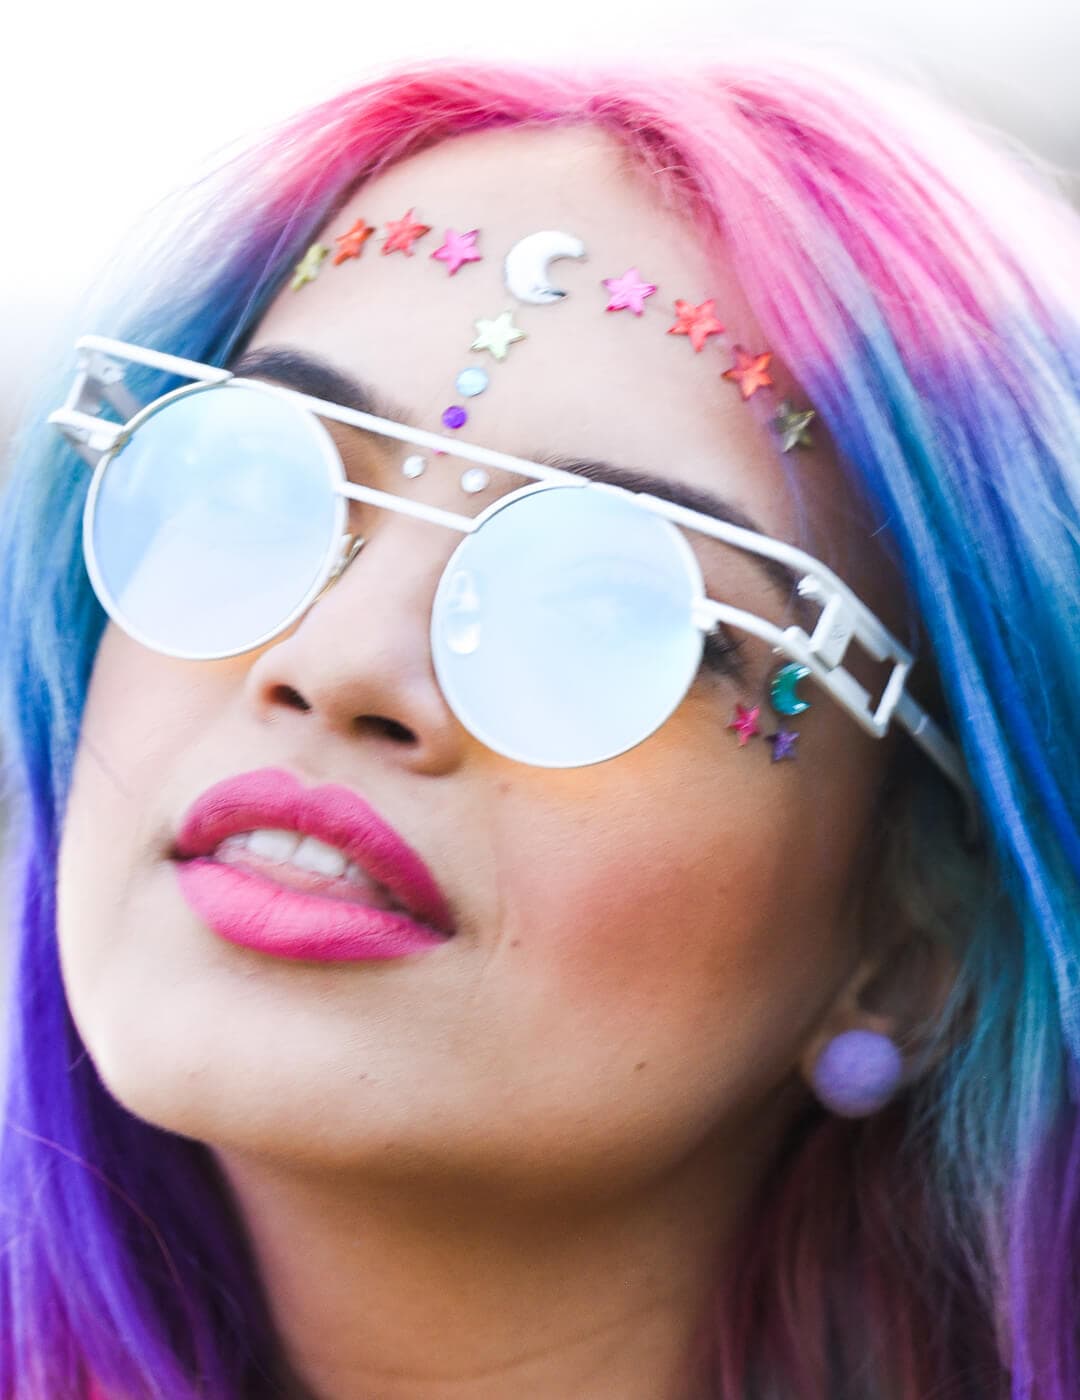 Close-up of a woman with rainbow hair color rocking sunglasses, hot pink lips, and face full of stars and moon gemstones